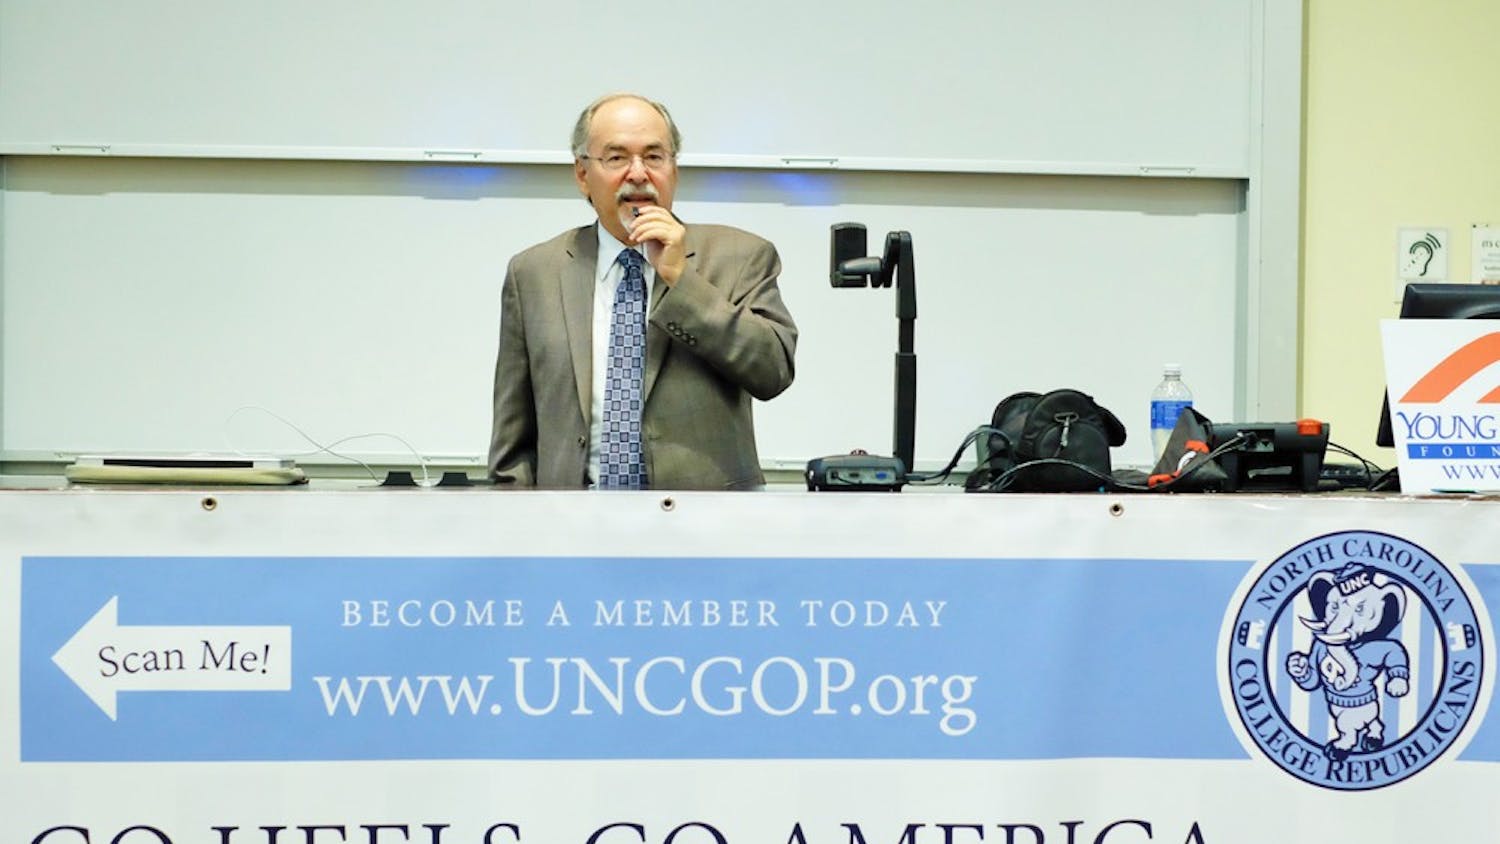 The UNC College Republicans hosted David Horowitz, who spoke on the Israeli-Palestinian conflict and anti-semitism, Monday night in Carroll Hall.